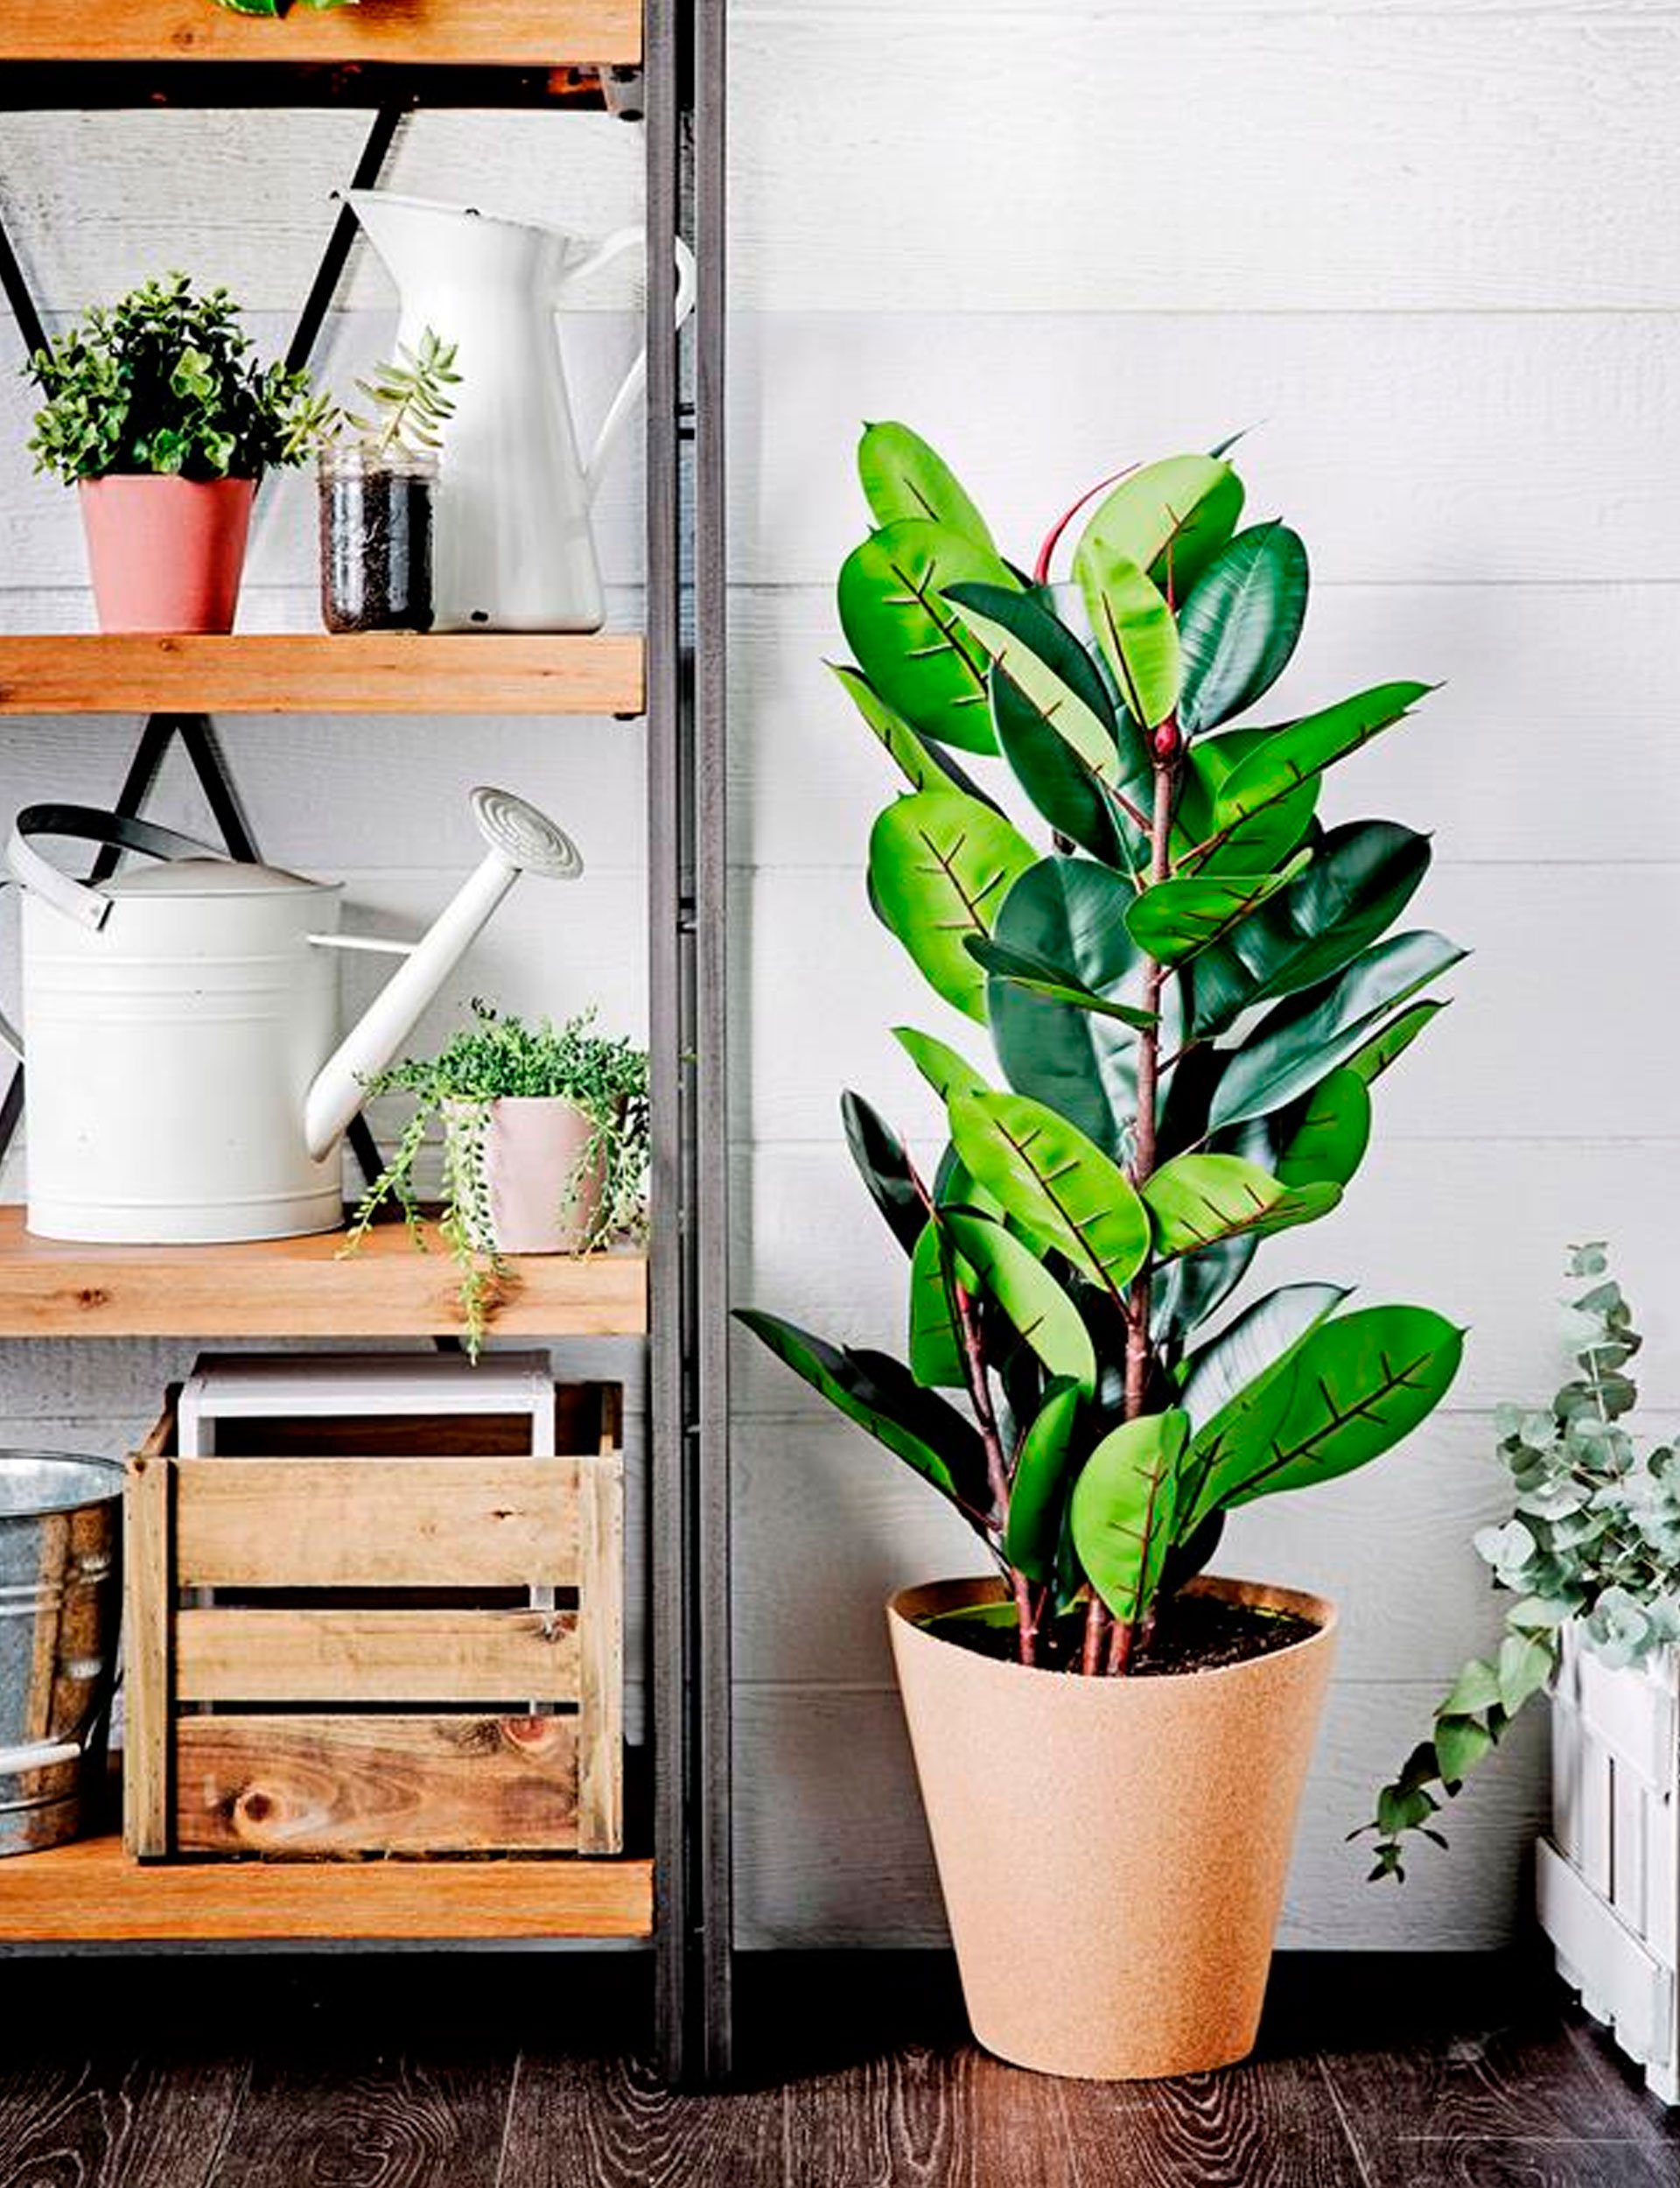 Here's why you need to clean your indoor plants regularly